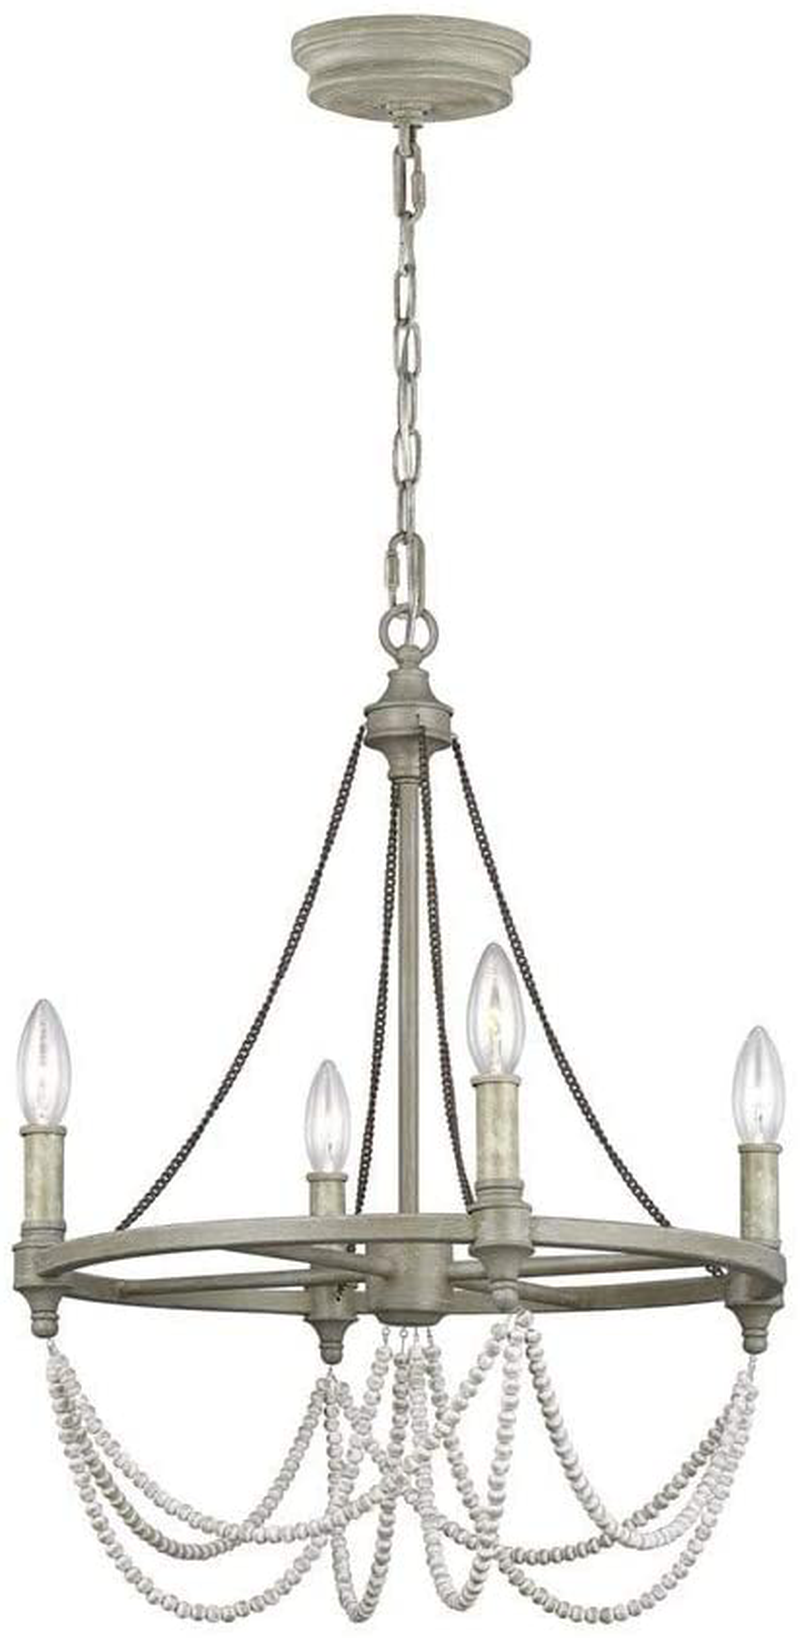 Feiss F3132/6FWO/DWW Beverly Candle Chandelier Lighting, White, 6-Light (28"Dia x 36"H) 360watts Home & Garden > Lighting > Lighting Fixtures > Chandeliers Feiss 4-Light  